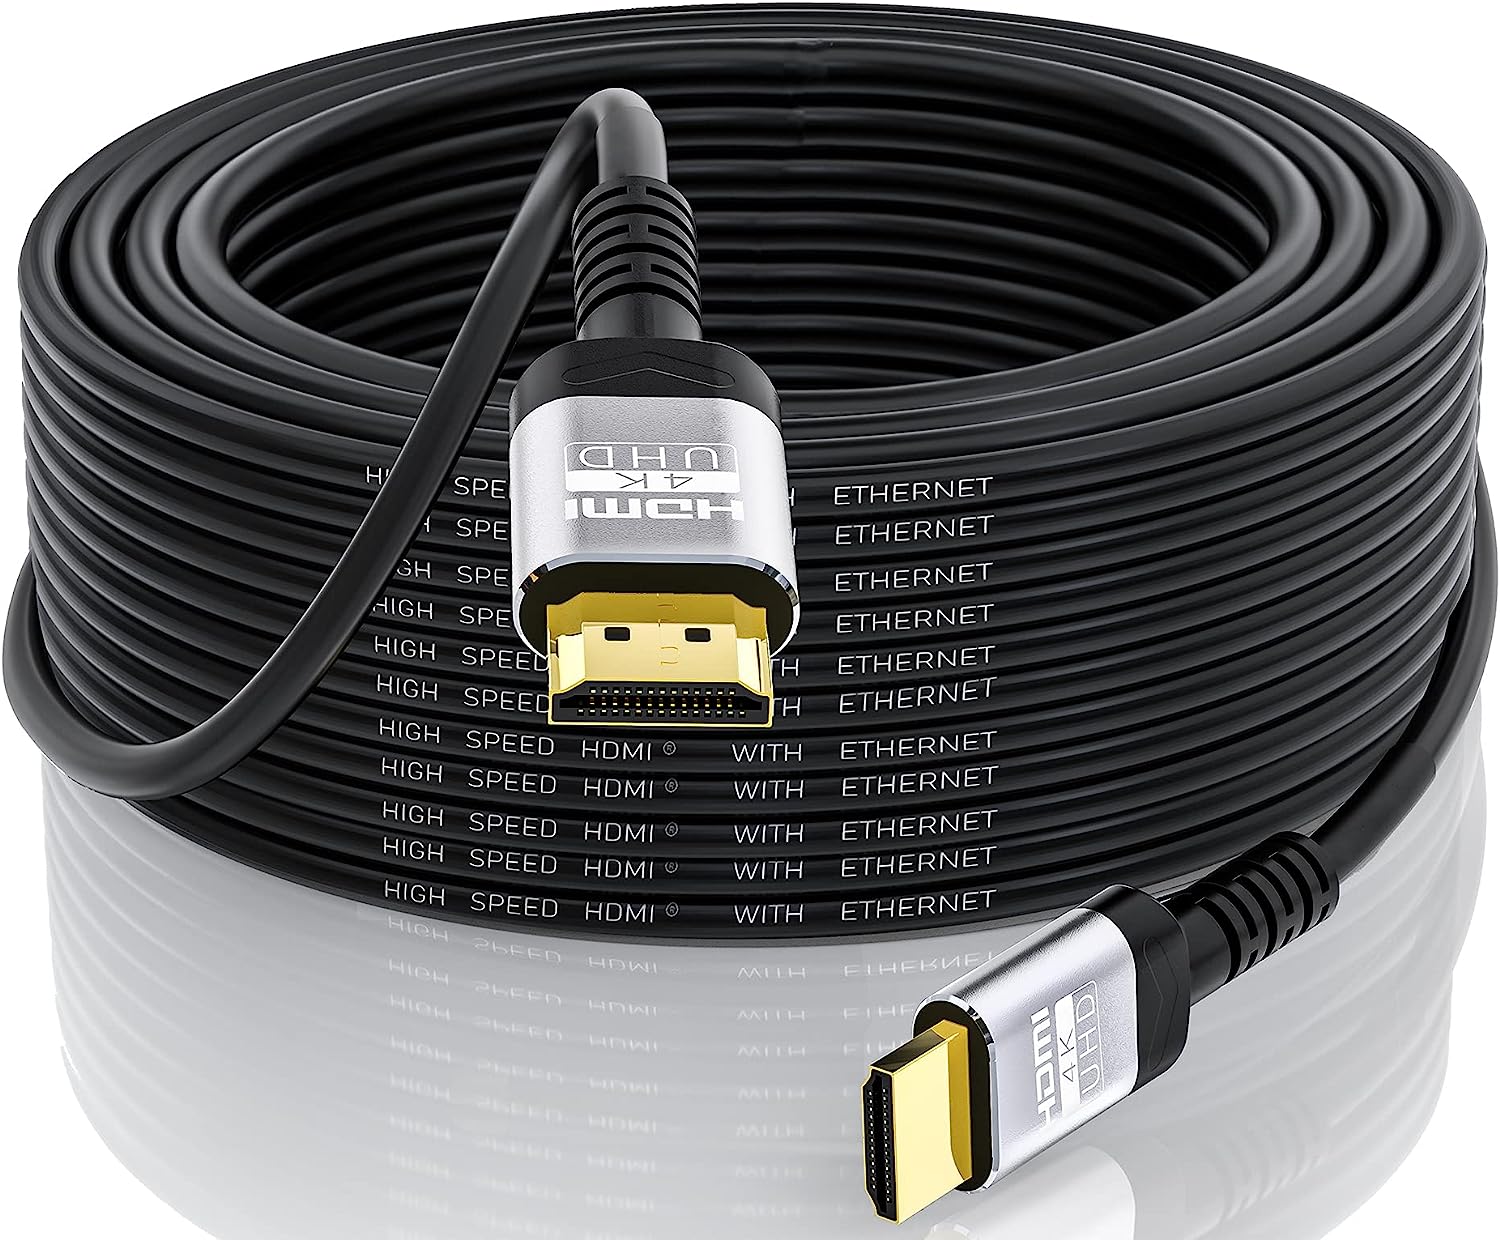 Soonsoonic 4K HDMI Cable 50Ft | High Speed HDMI 2.0 [...]